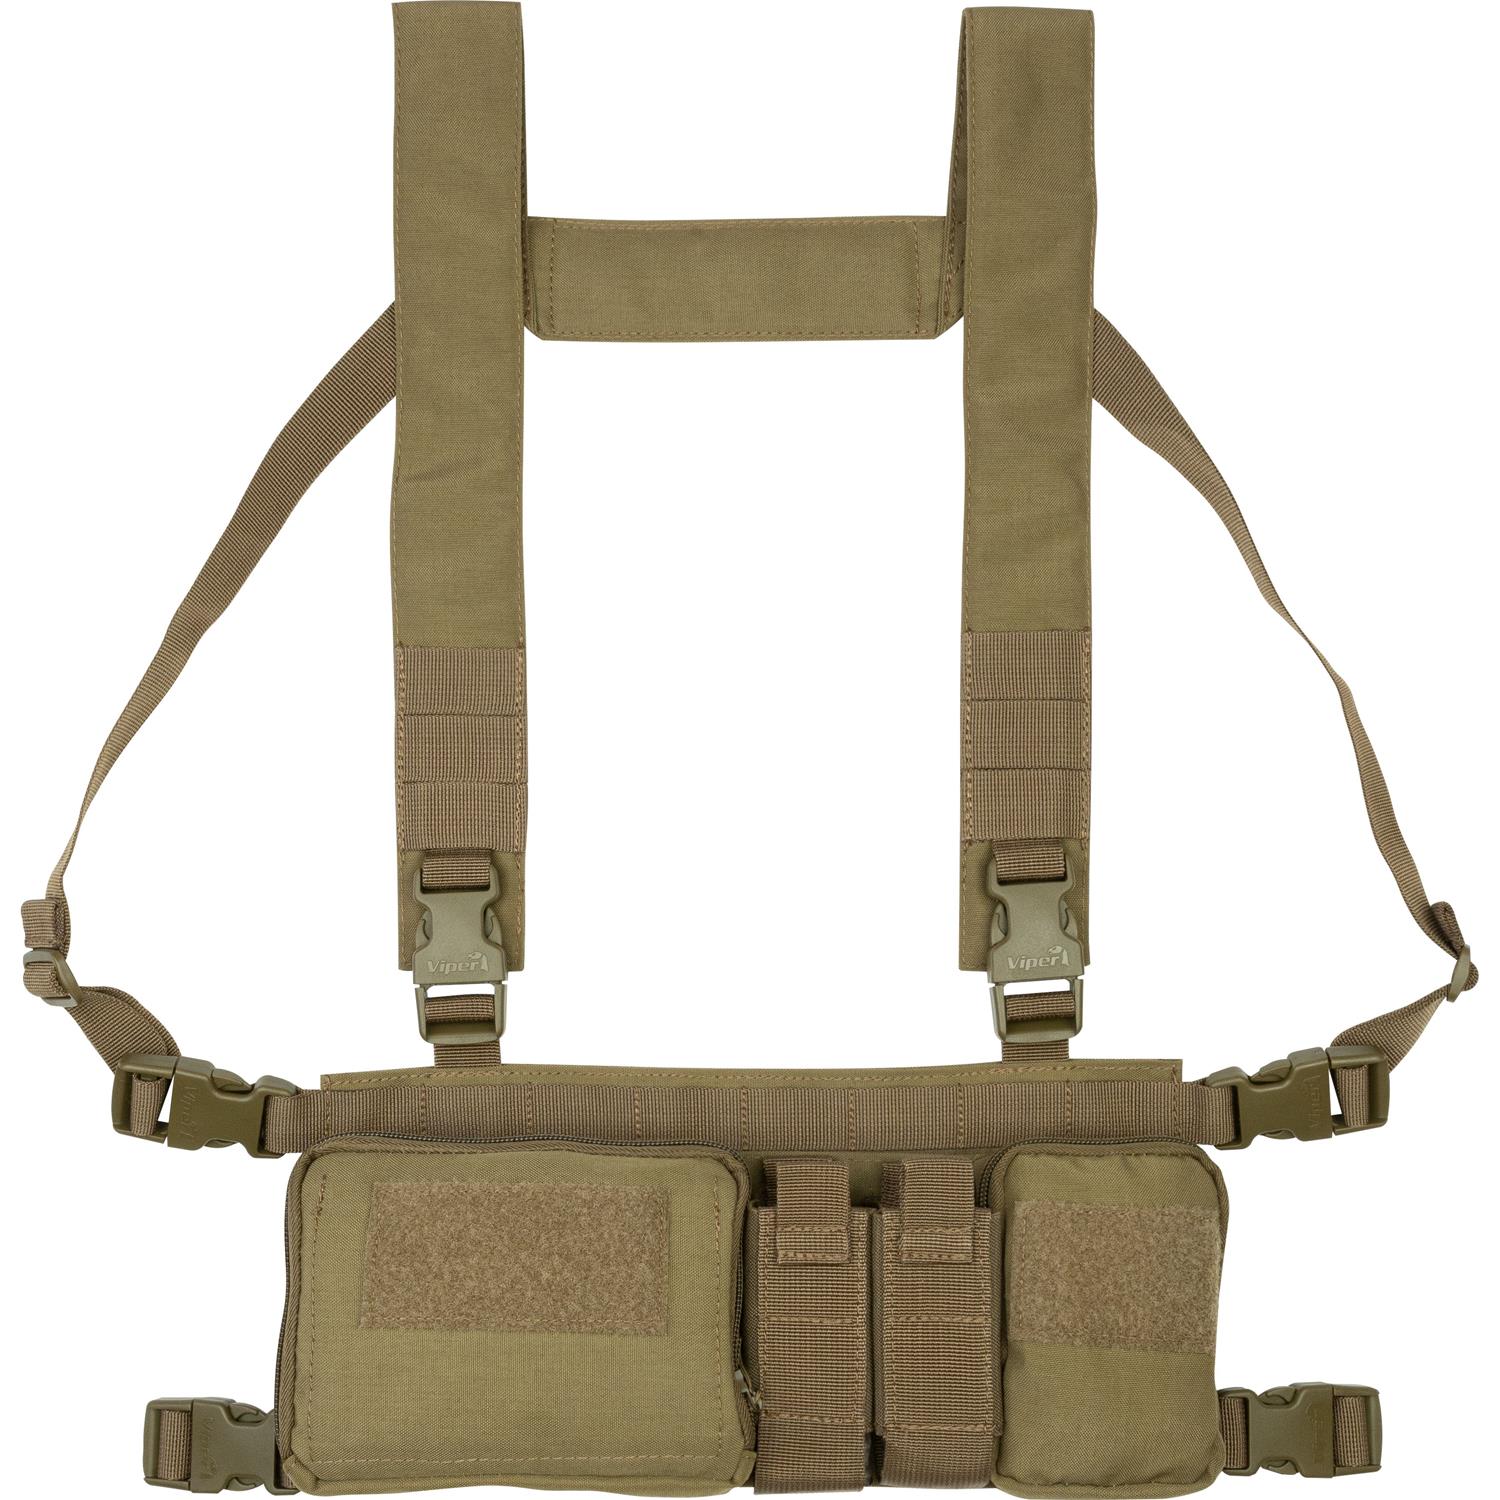 Viper Tactical VX Buckle Up Airsoft Ready Rig - Tan - Airsoft Central